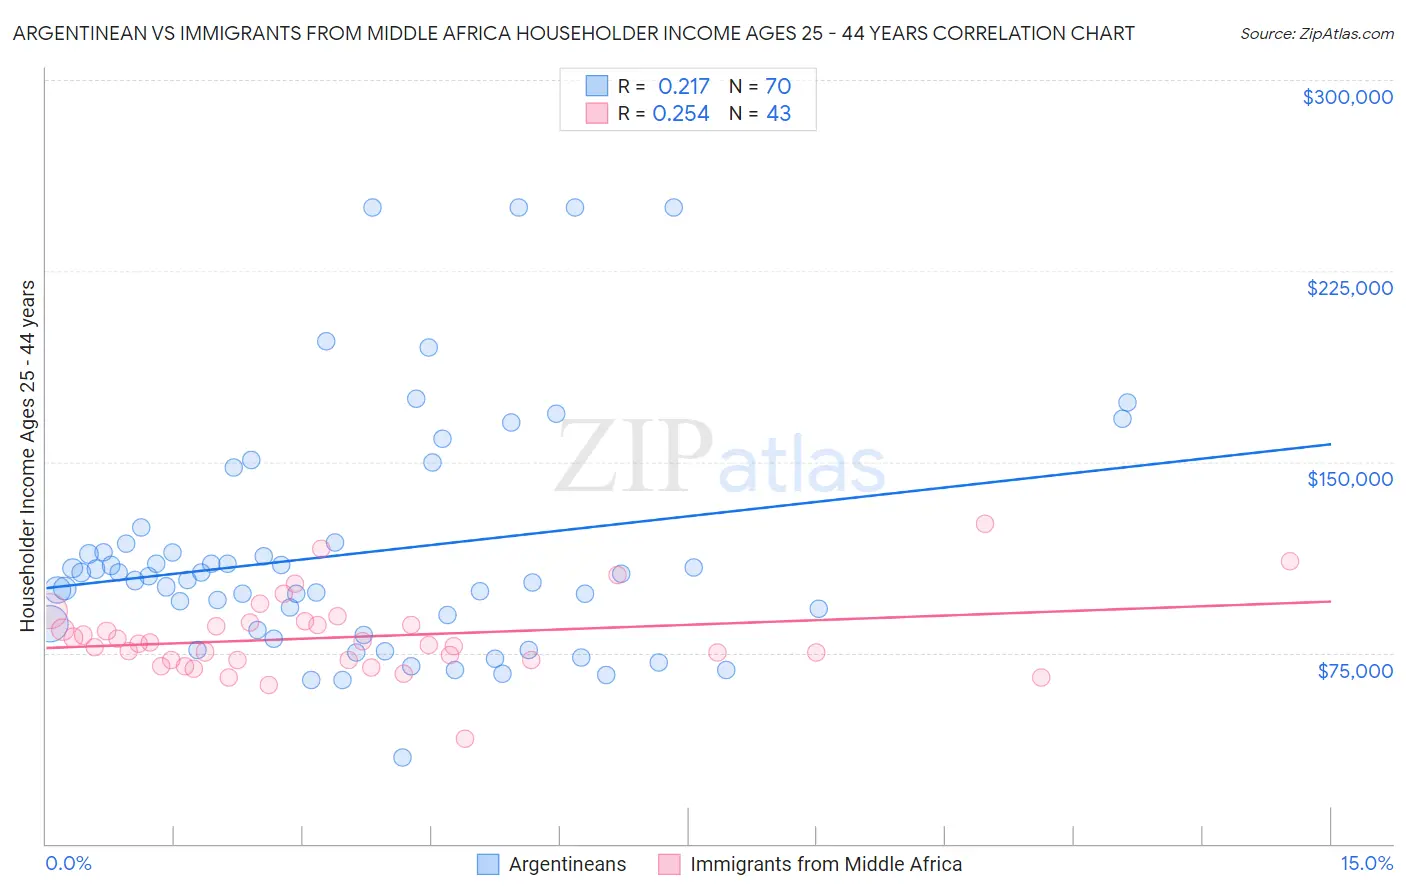 Argentinean vs Immigrants from Middle Africa Householder Income Ages 25 - 44 years